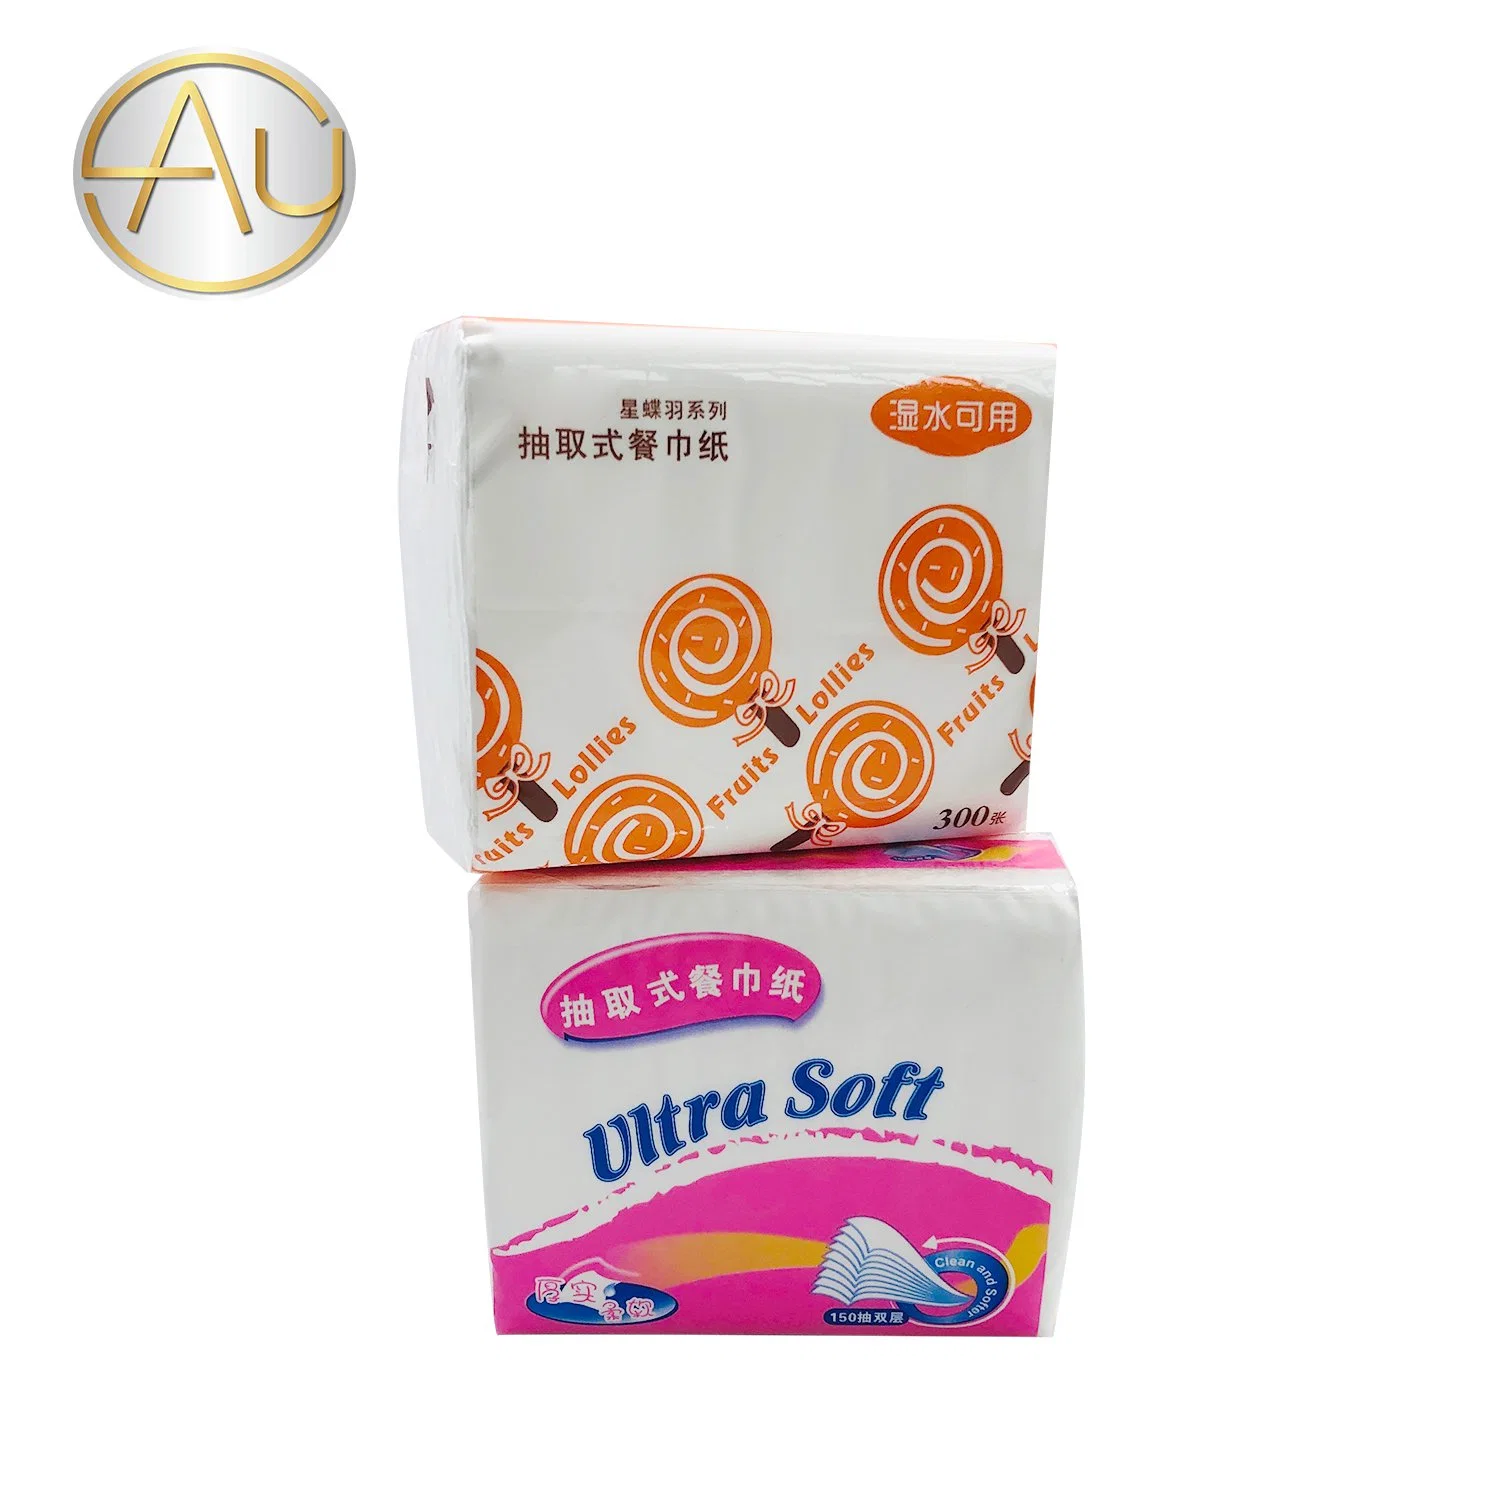 High Quality Chinese White Soft Nakin Party Facial Tissue